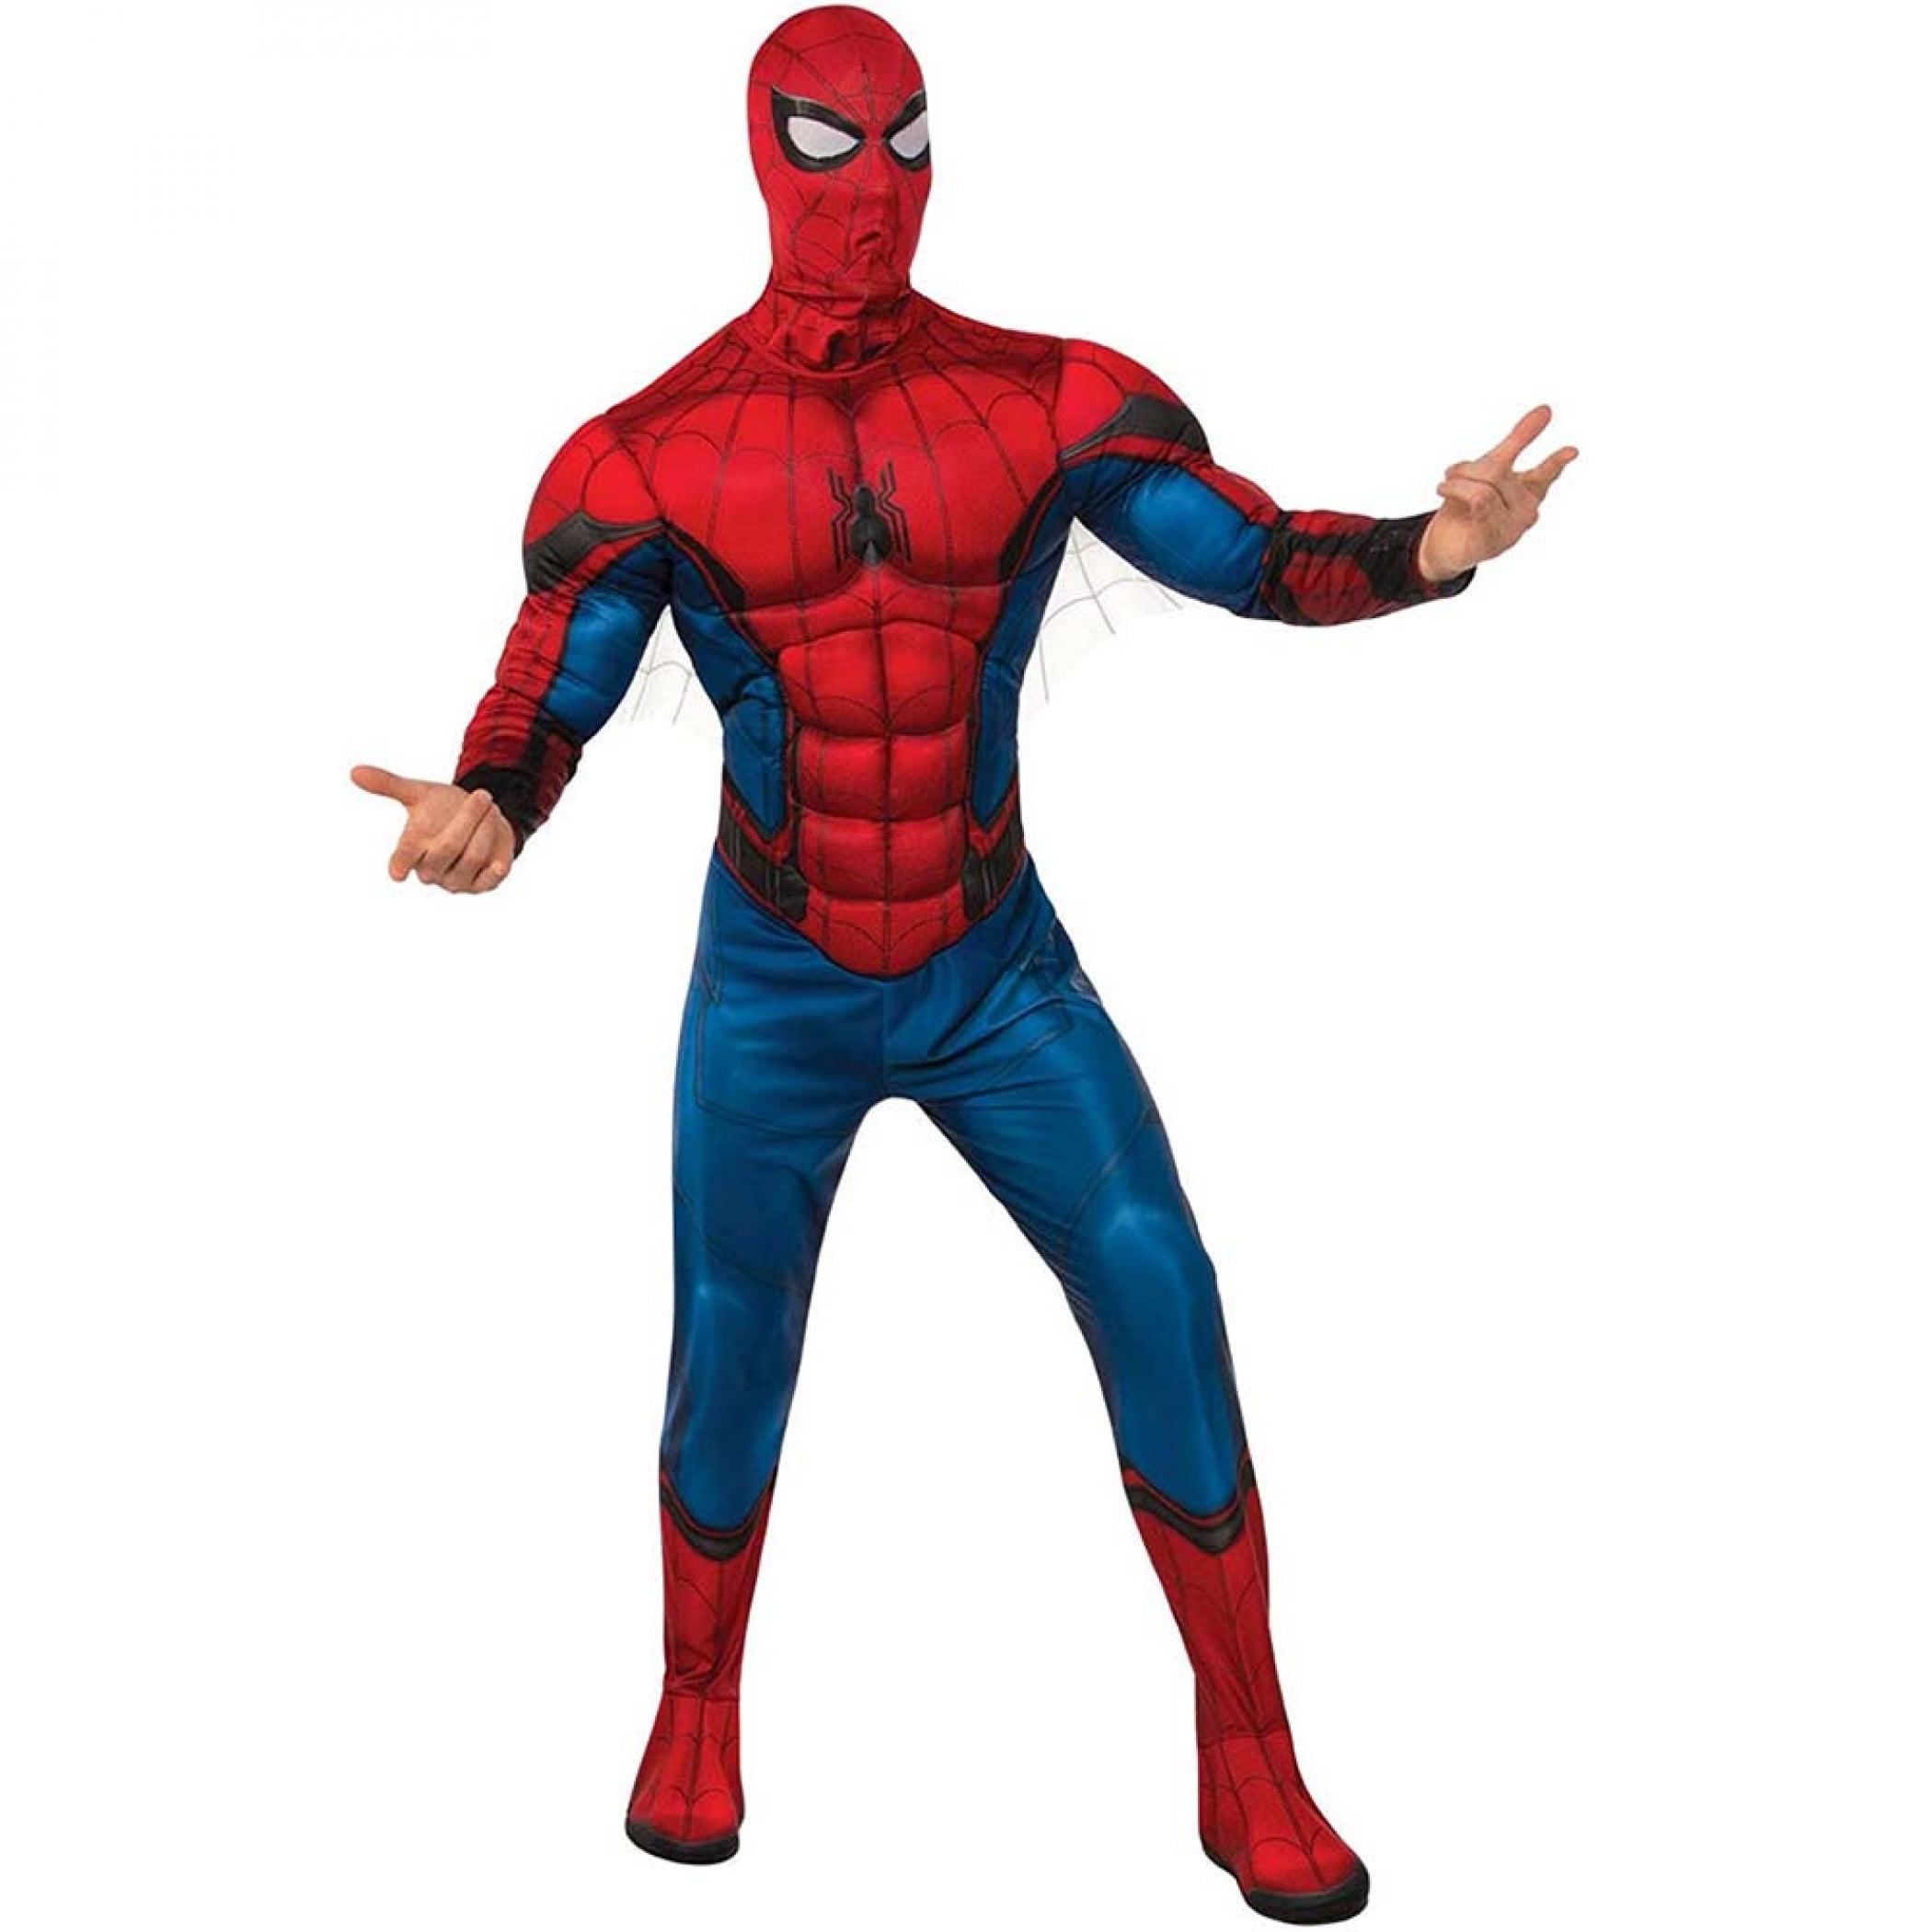 Spiderman Deluxe Costume Adults Licensed Super Hero Marvel Comic Fancy Dress Out 